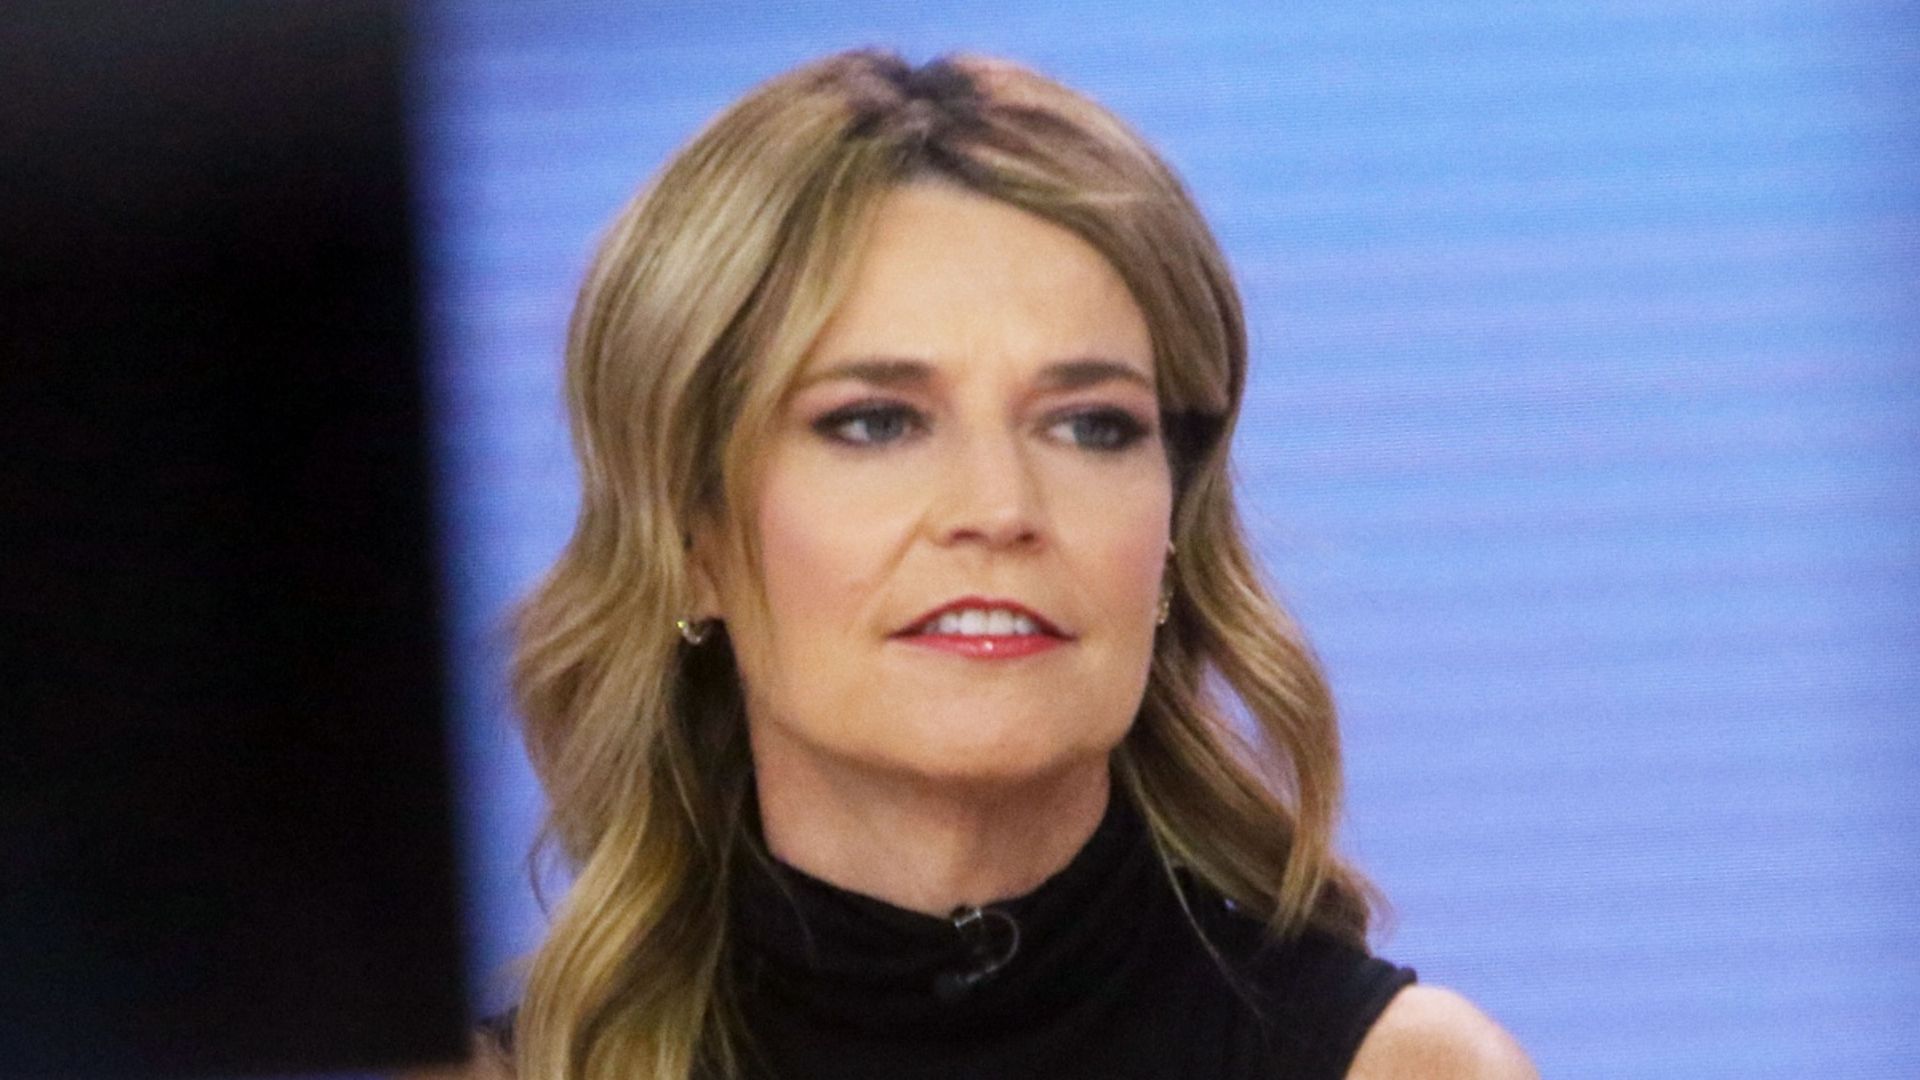 Today's Savannah Guthrie forced to leave midshow after falling ill